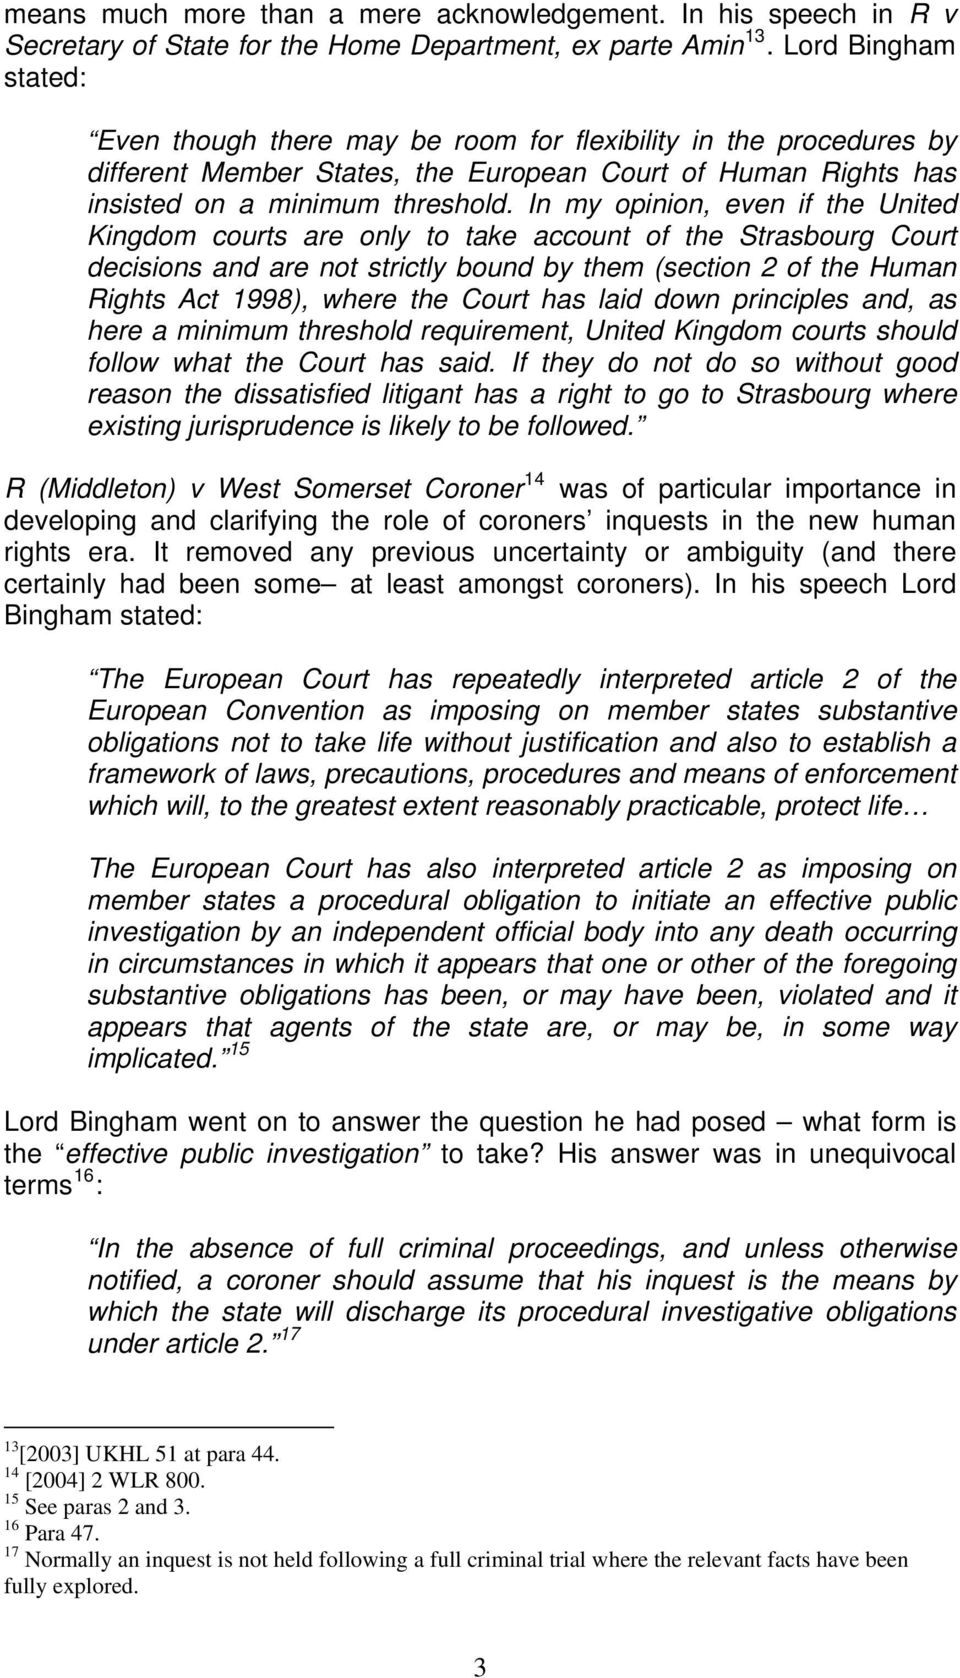 In my opinion, even if the United Kingdom courts are only to take account of the Strasbourg Court decisions and are not strictly bound by them (section 2 of the Human Rights Act 1998), where the